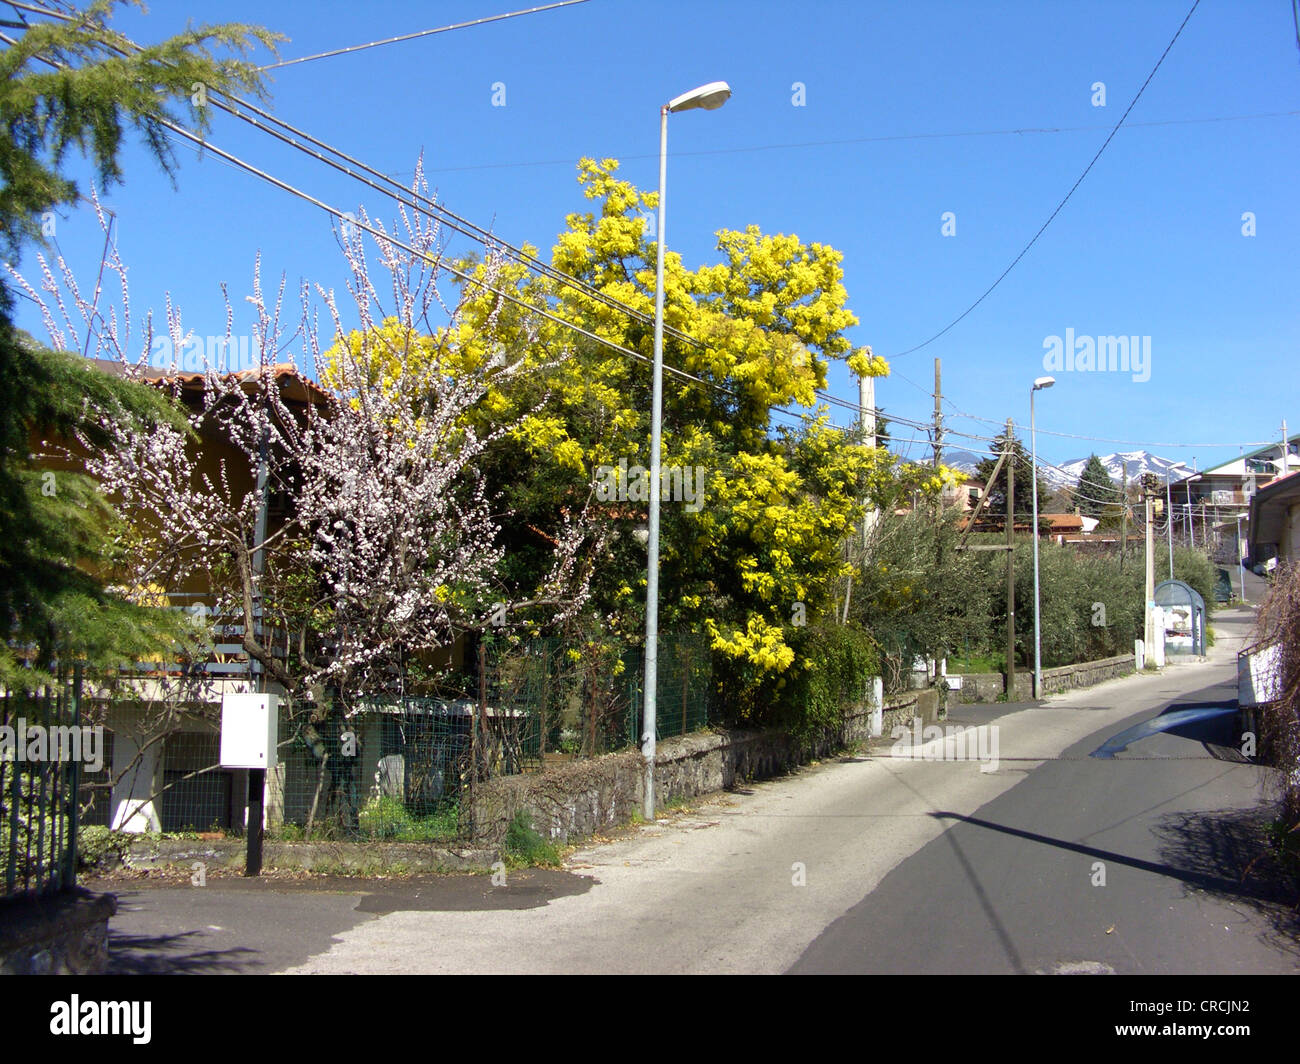 silver wattle (Acacia dealbata), blooming as an ornamental tree in a village south of the Mount Etna (in background), Italy, Sicilia Stock Photo